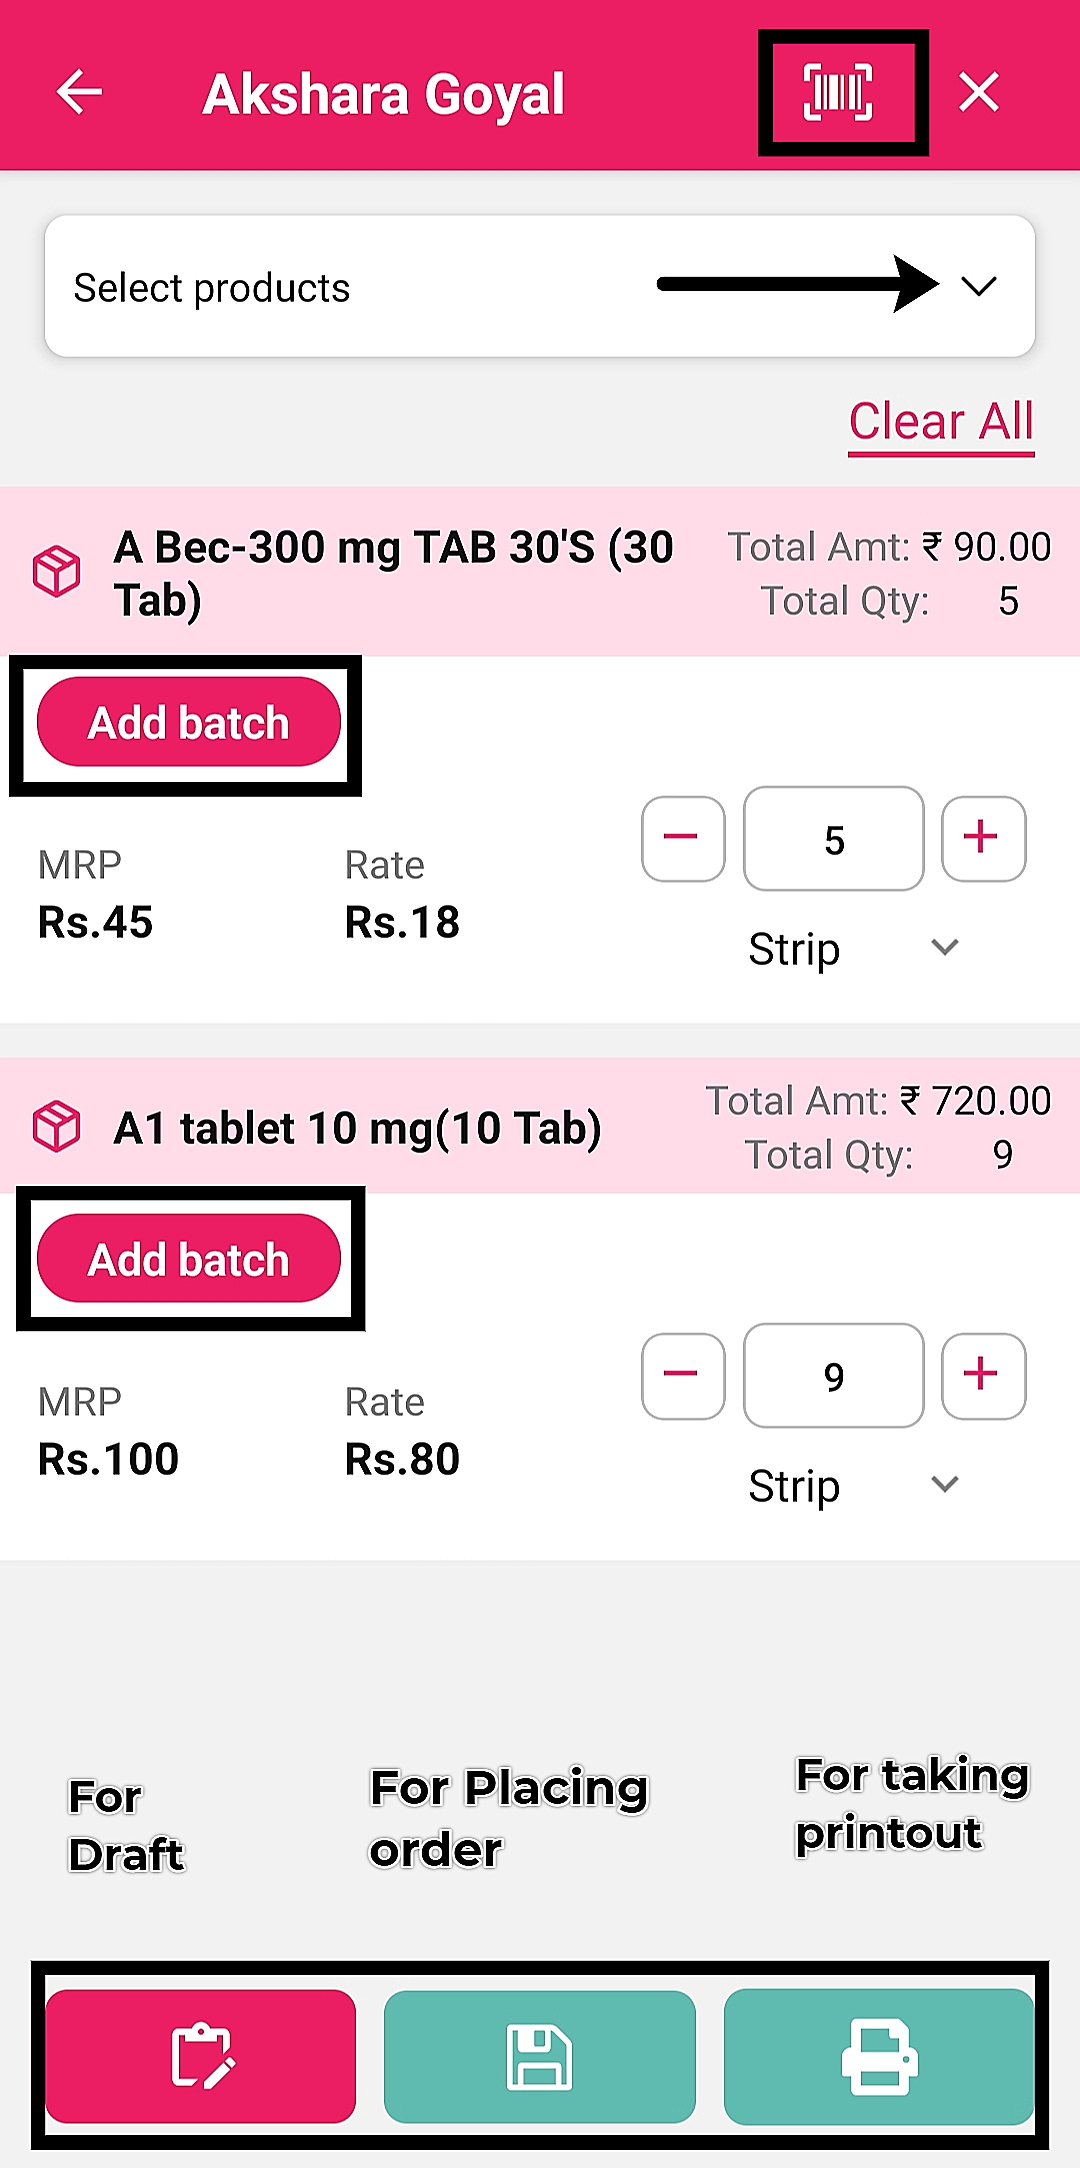 Product selection interface in SWILPOS app for order creation with options for batch addition and quantity adjustments.